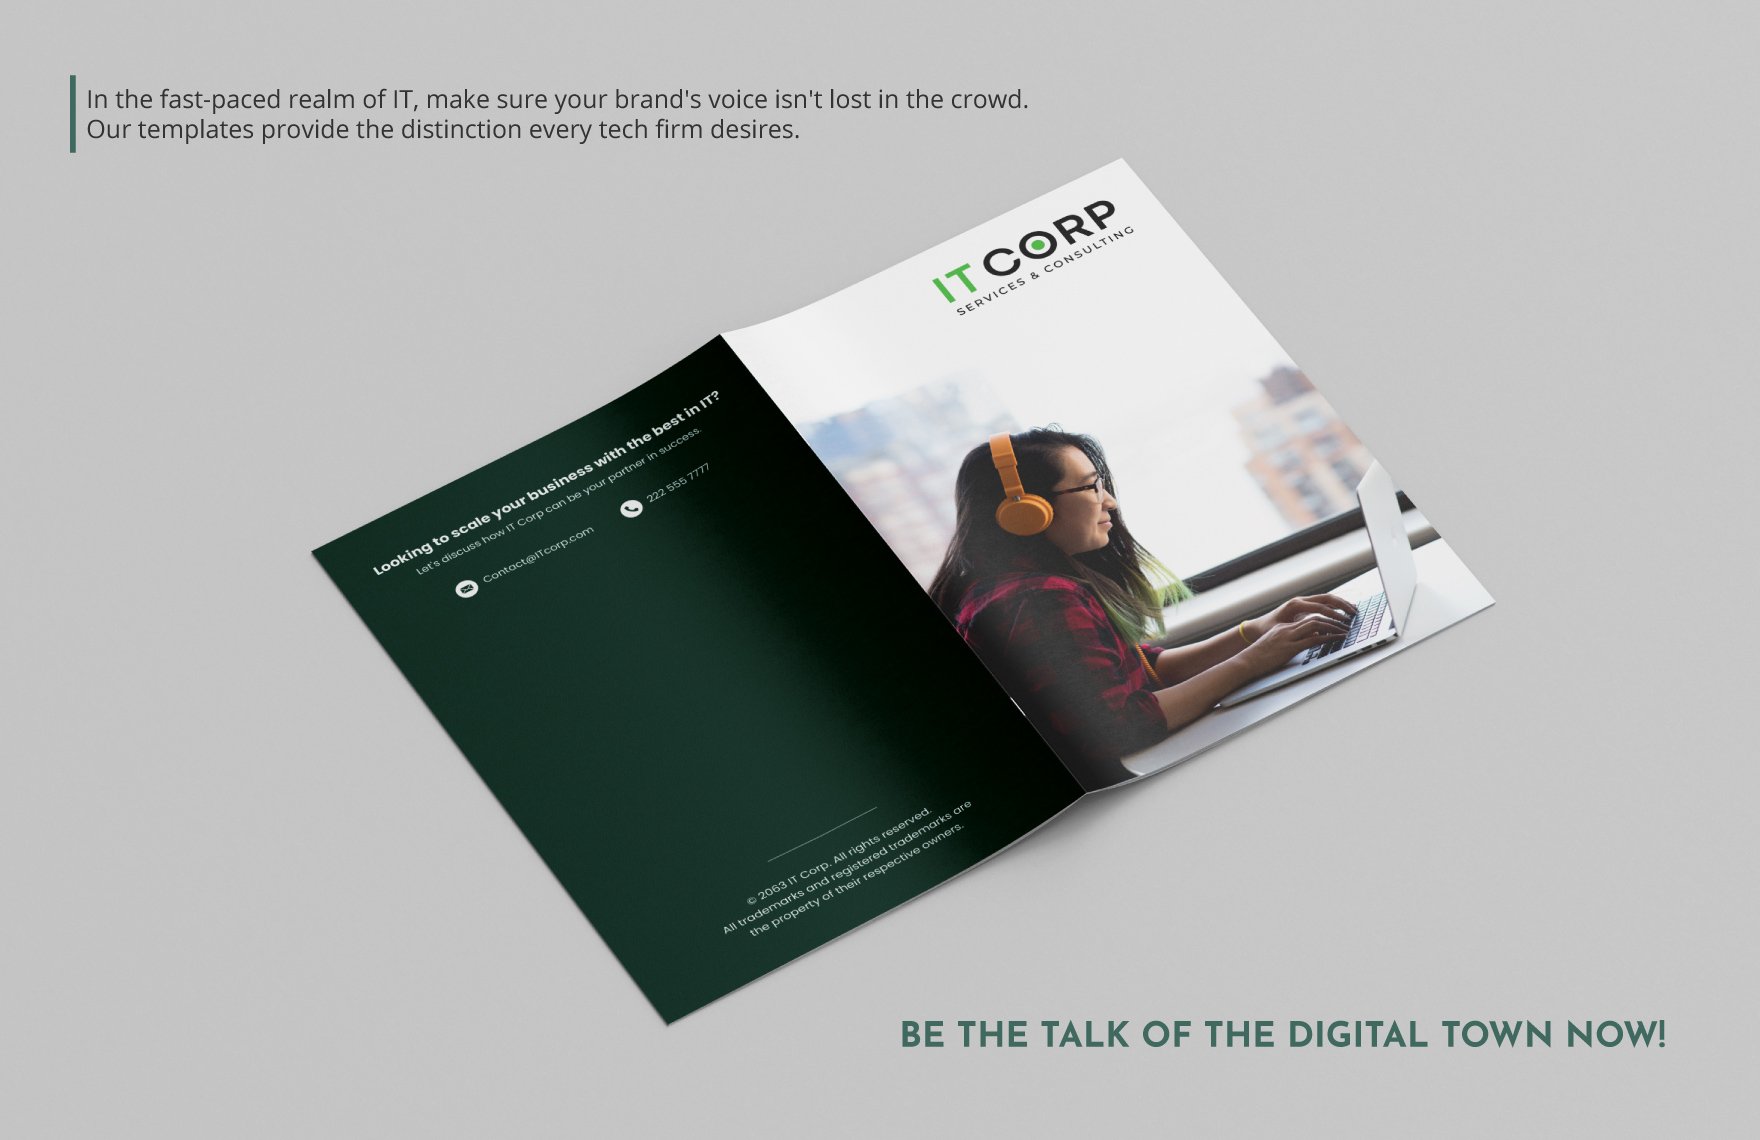 Managed IT Services Company Profile Digital Brochure Template